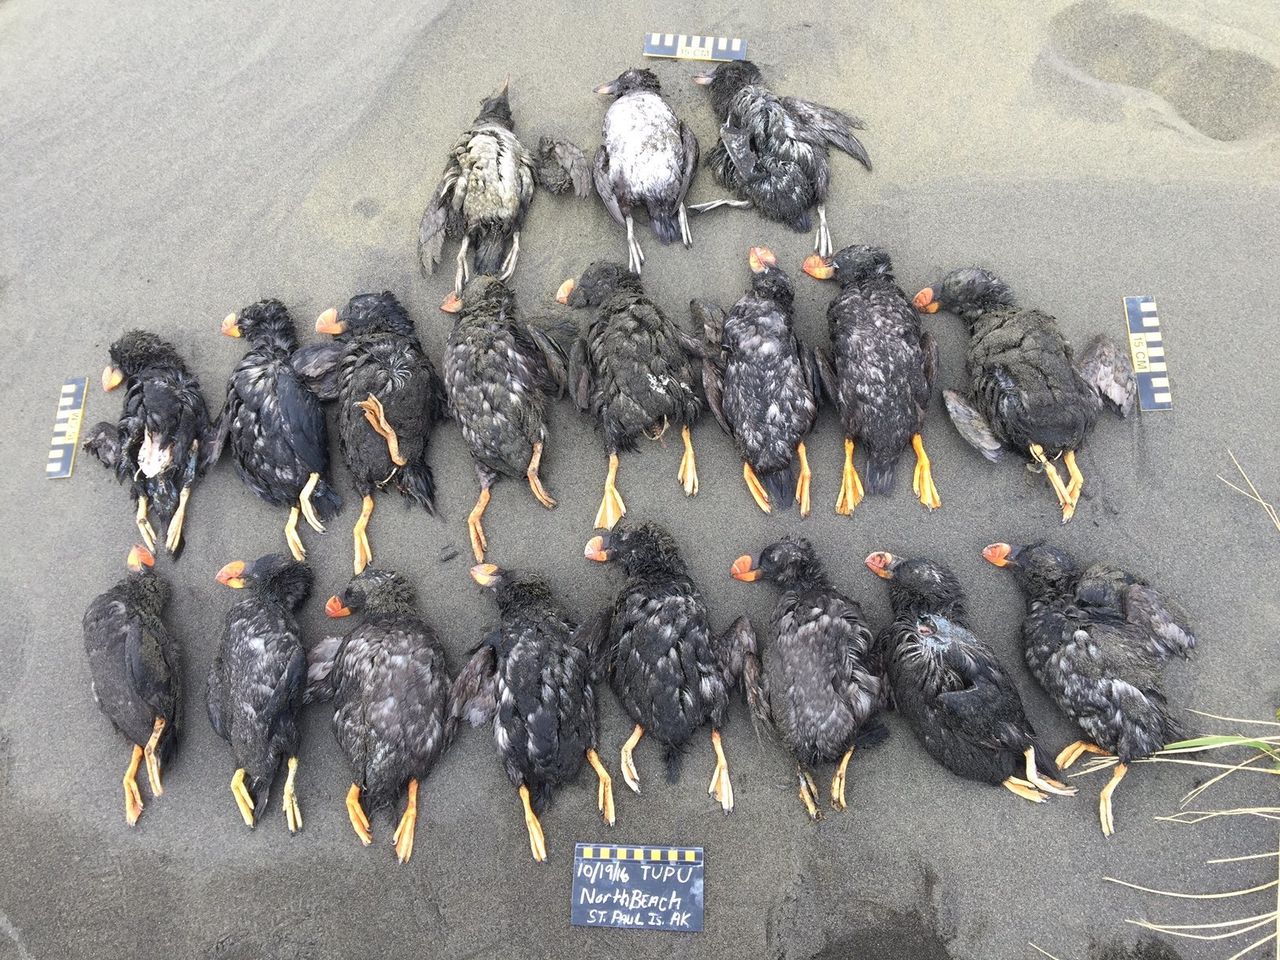 Scientists say they've found no evidence of disease or contaminants in St. Paul's dead puffins.